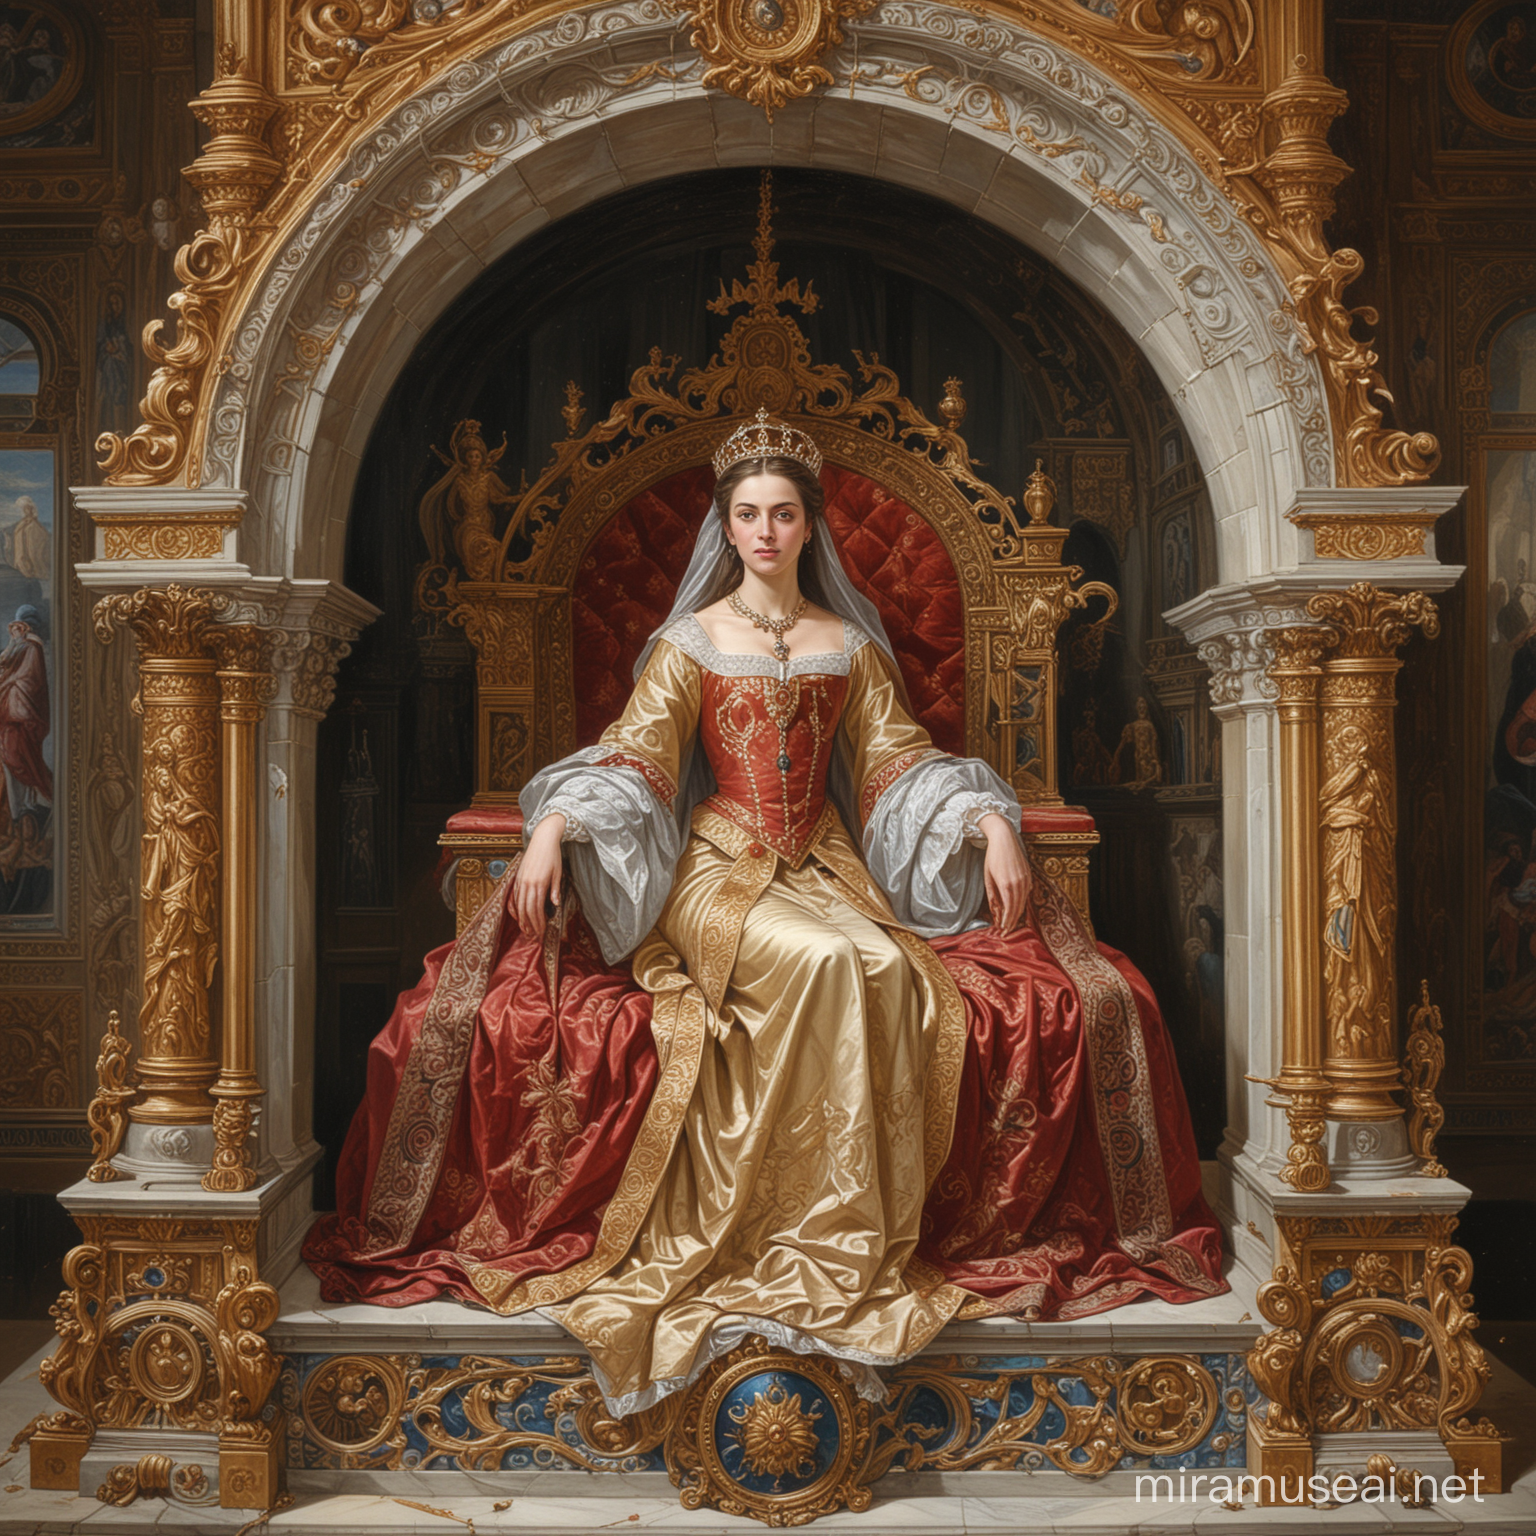 Countess,The image is a painting of a person sitting on a throne. It depicts Ilis Countofe of Kildare, Elip, the daughter of Rich, Dail ri Ranchogle, Zy Ast 7. Wof The Daughter of Land Wilowlis of Pahan. The painting features a woman in royal attire.The image is of a large ornate clock inside a building. The clock is located at the 10 o'clock position. The building appears to be a cathedral or a place of worship, featuring baroque and Byzantine architecture with symmetrical design elements.Lying on back with face to the side